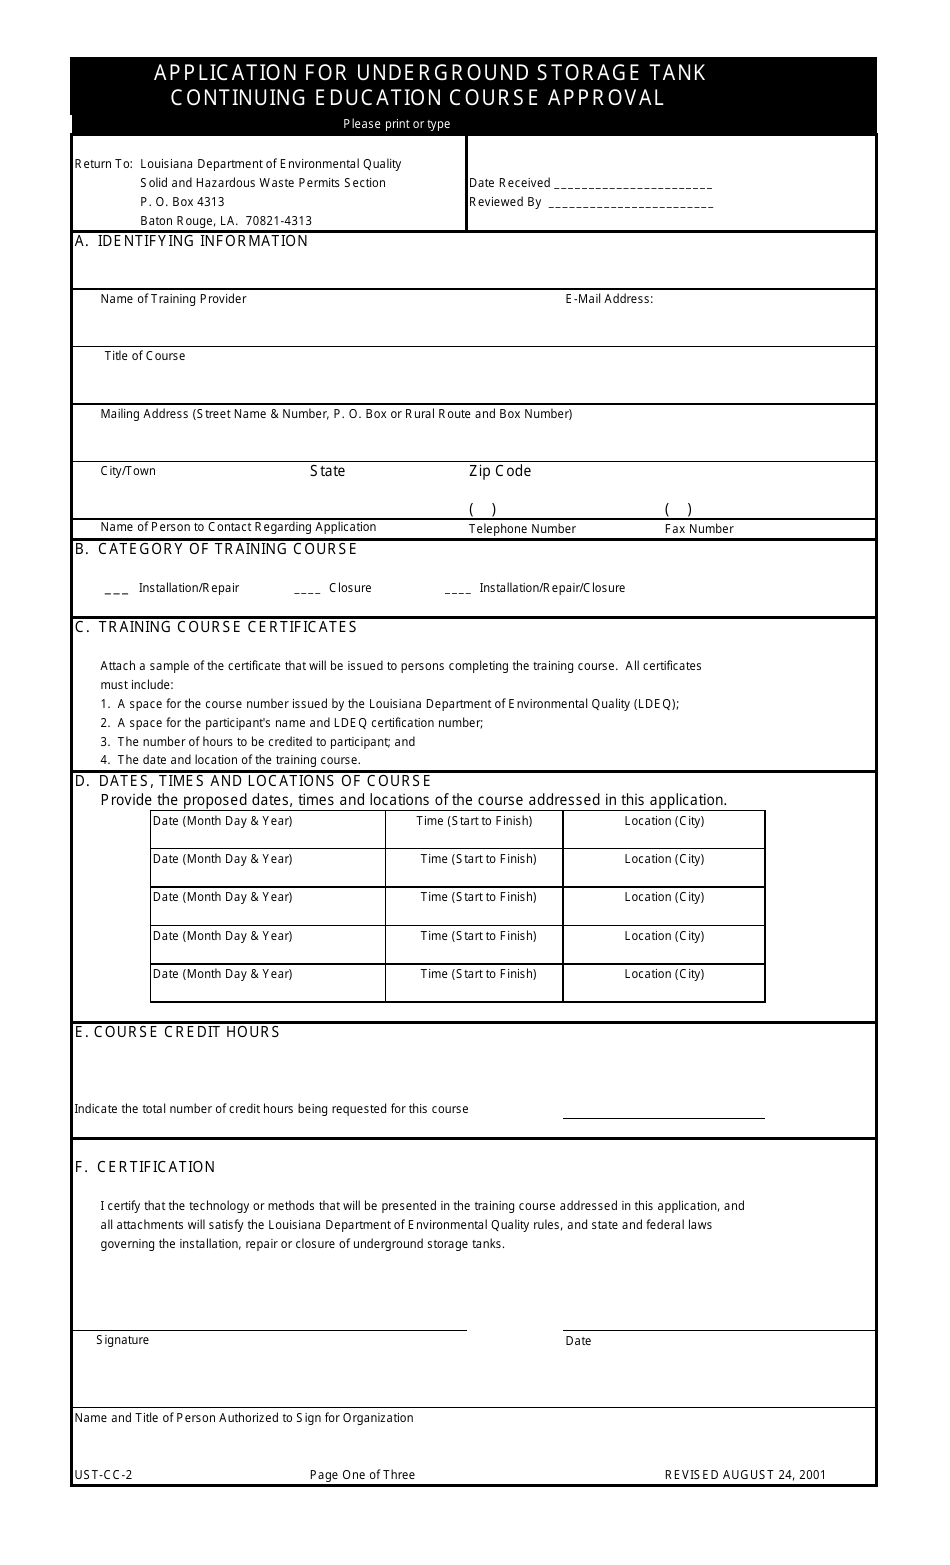 Form UST-CC-2 Application for Ust Continuing Education Course Approval - Louisiana, Page 1